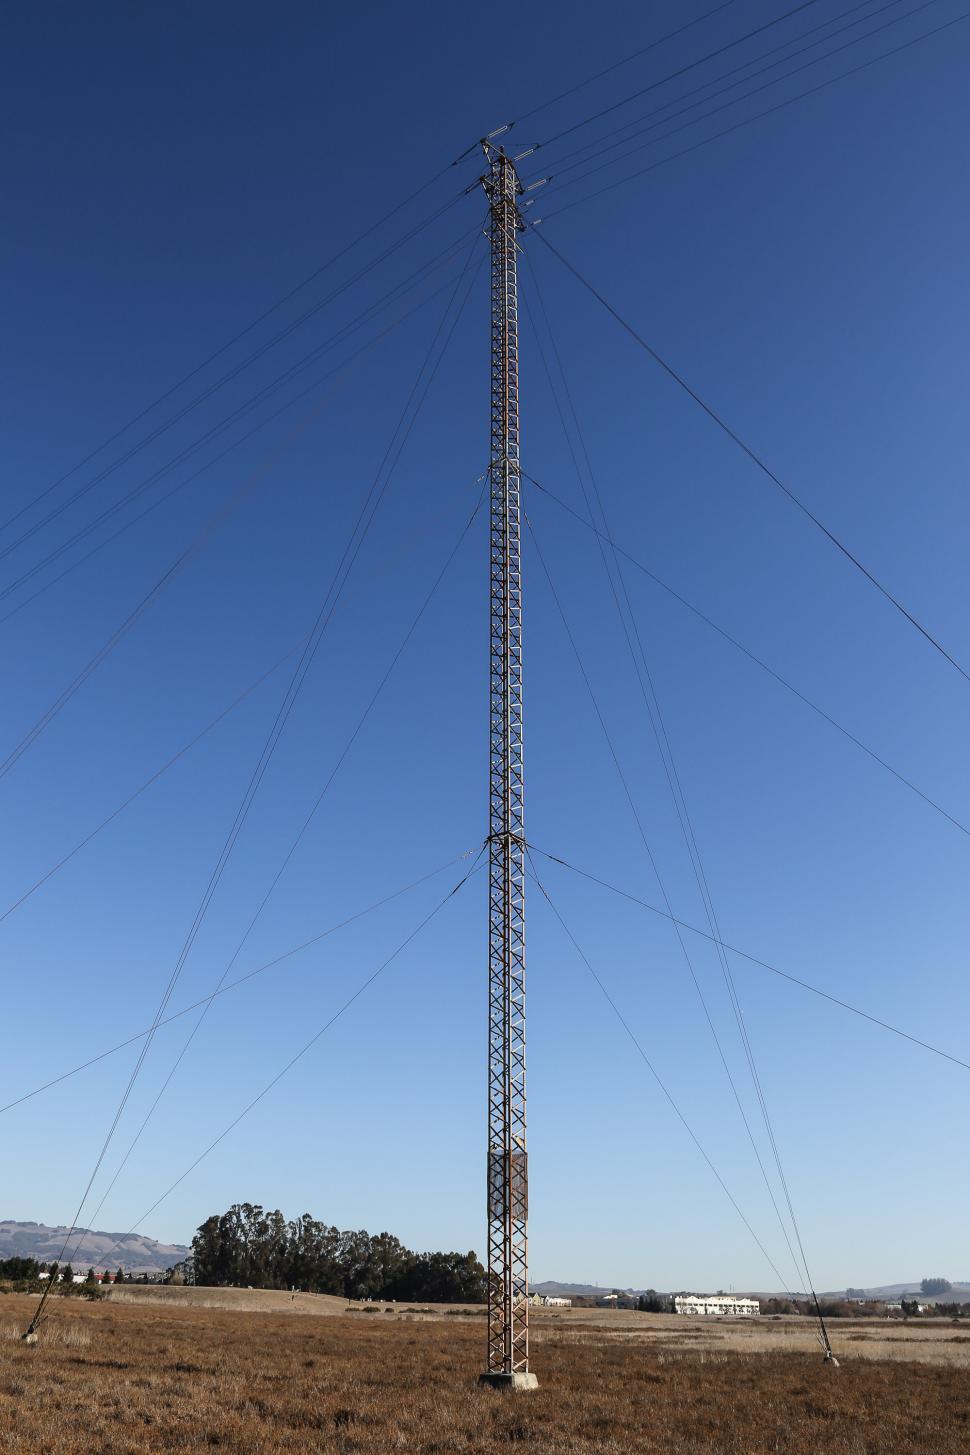 Free Image of Electricity Pole 